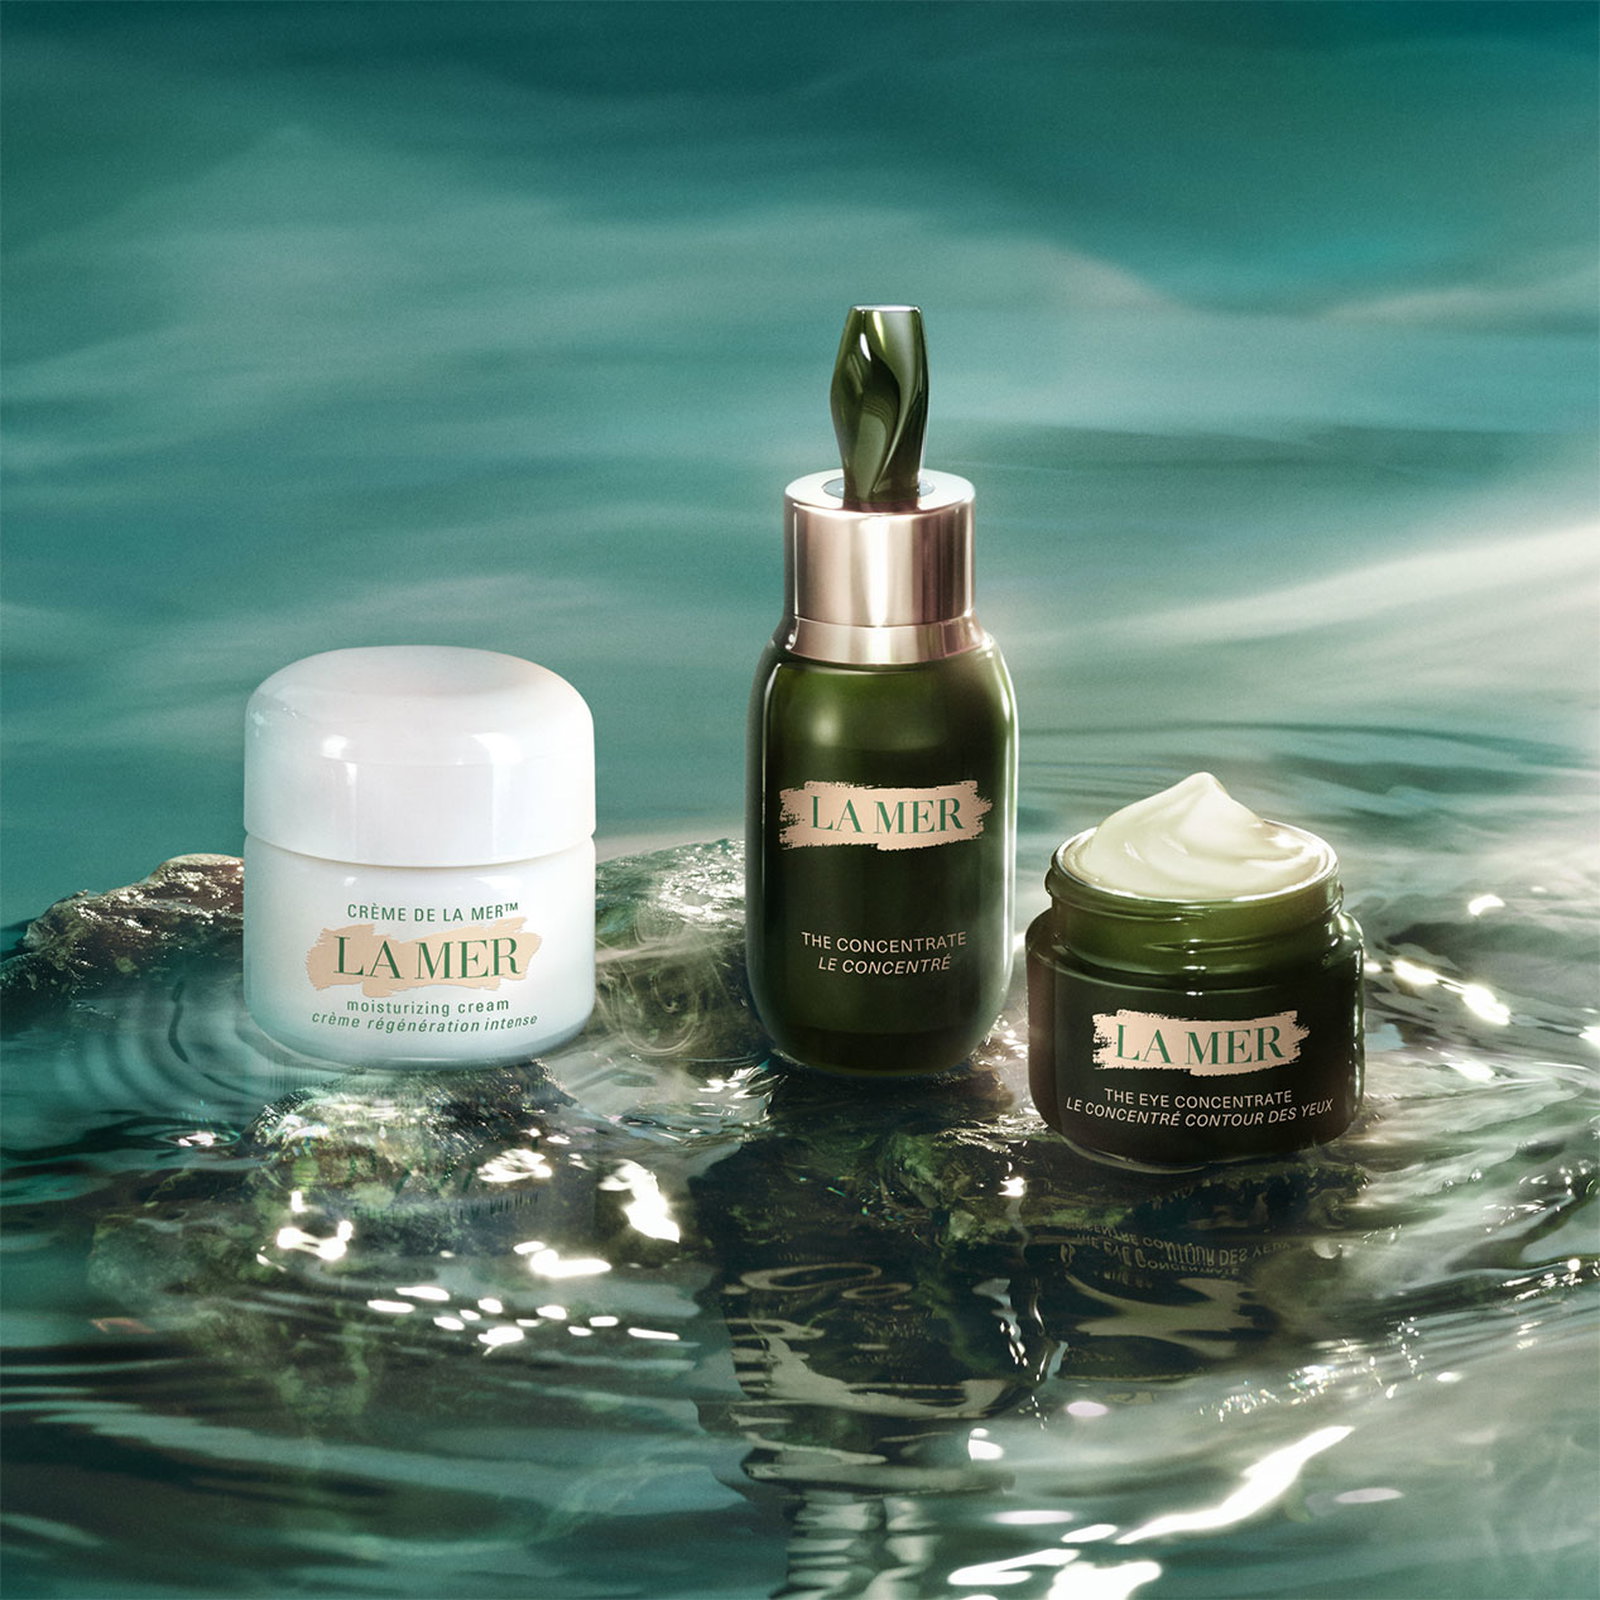 La Mer: Visible Vitality: Introducing The Revitalized Look